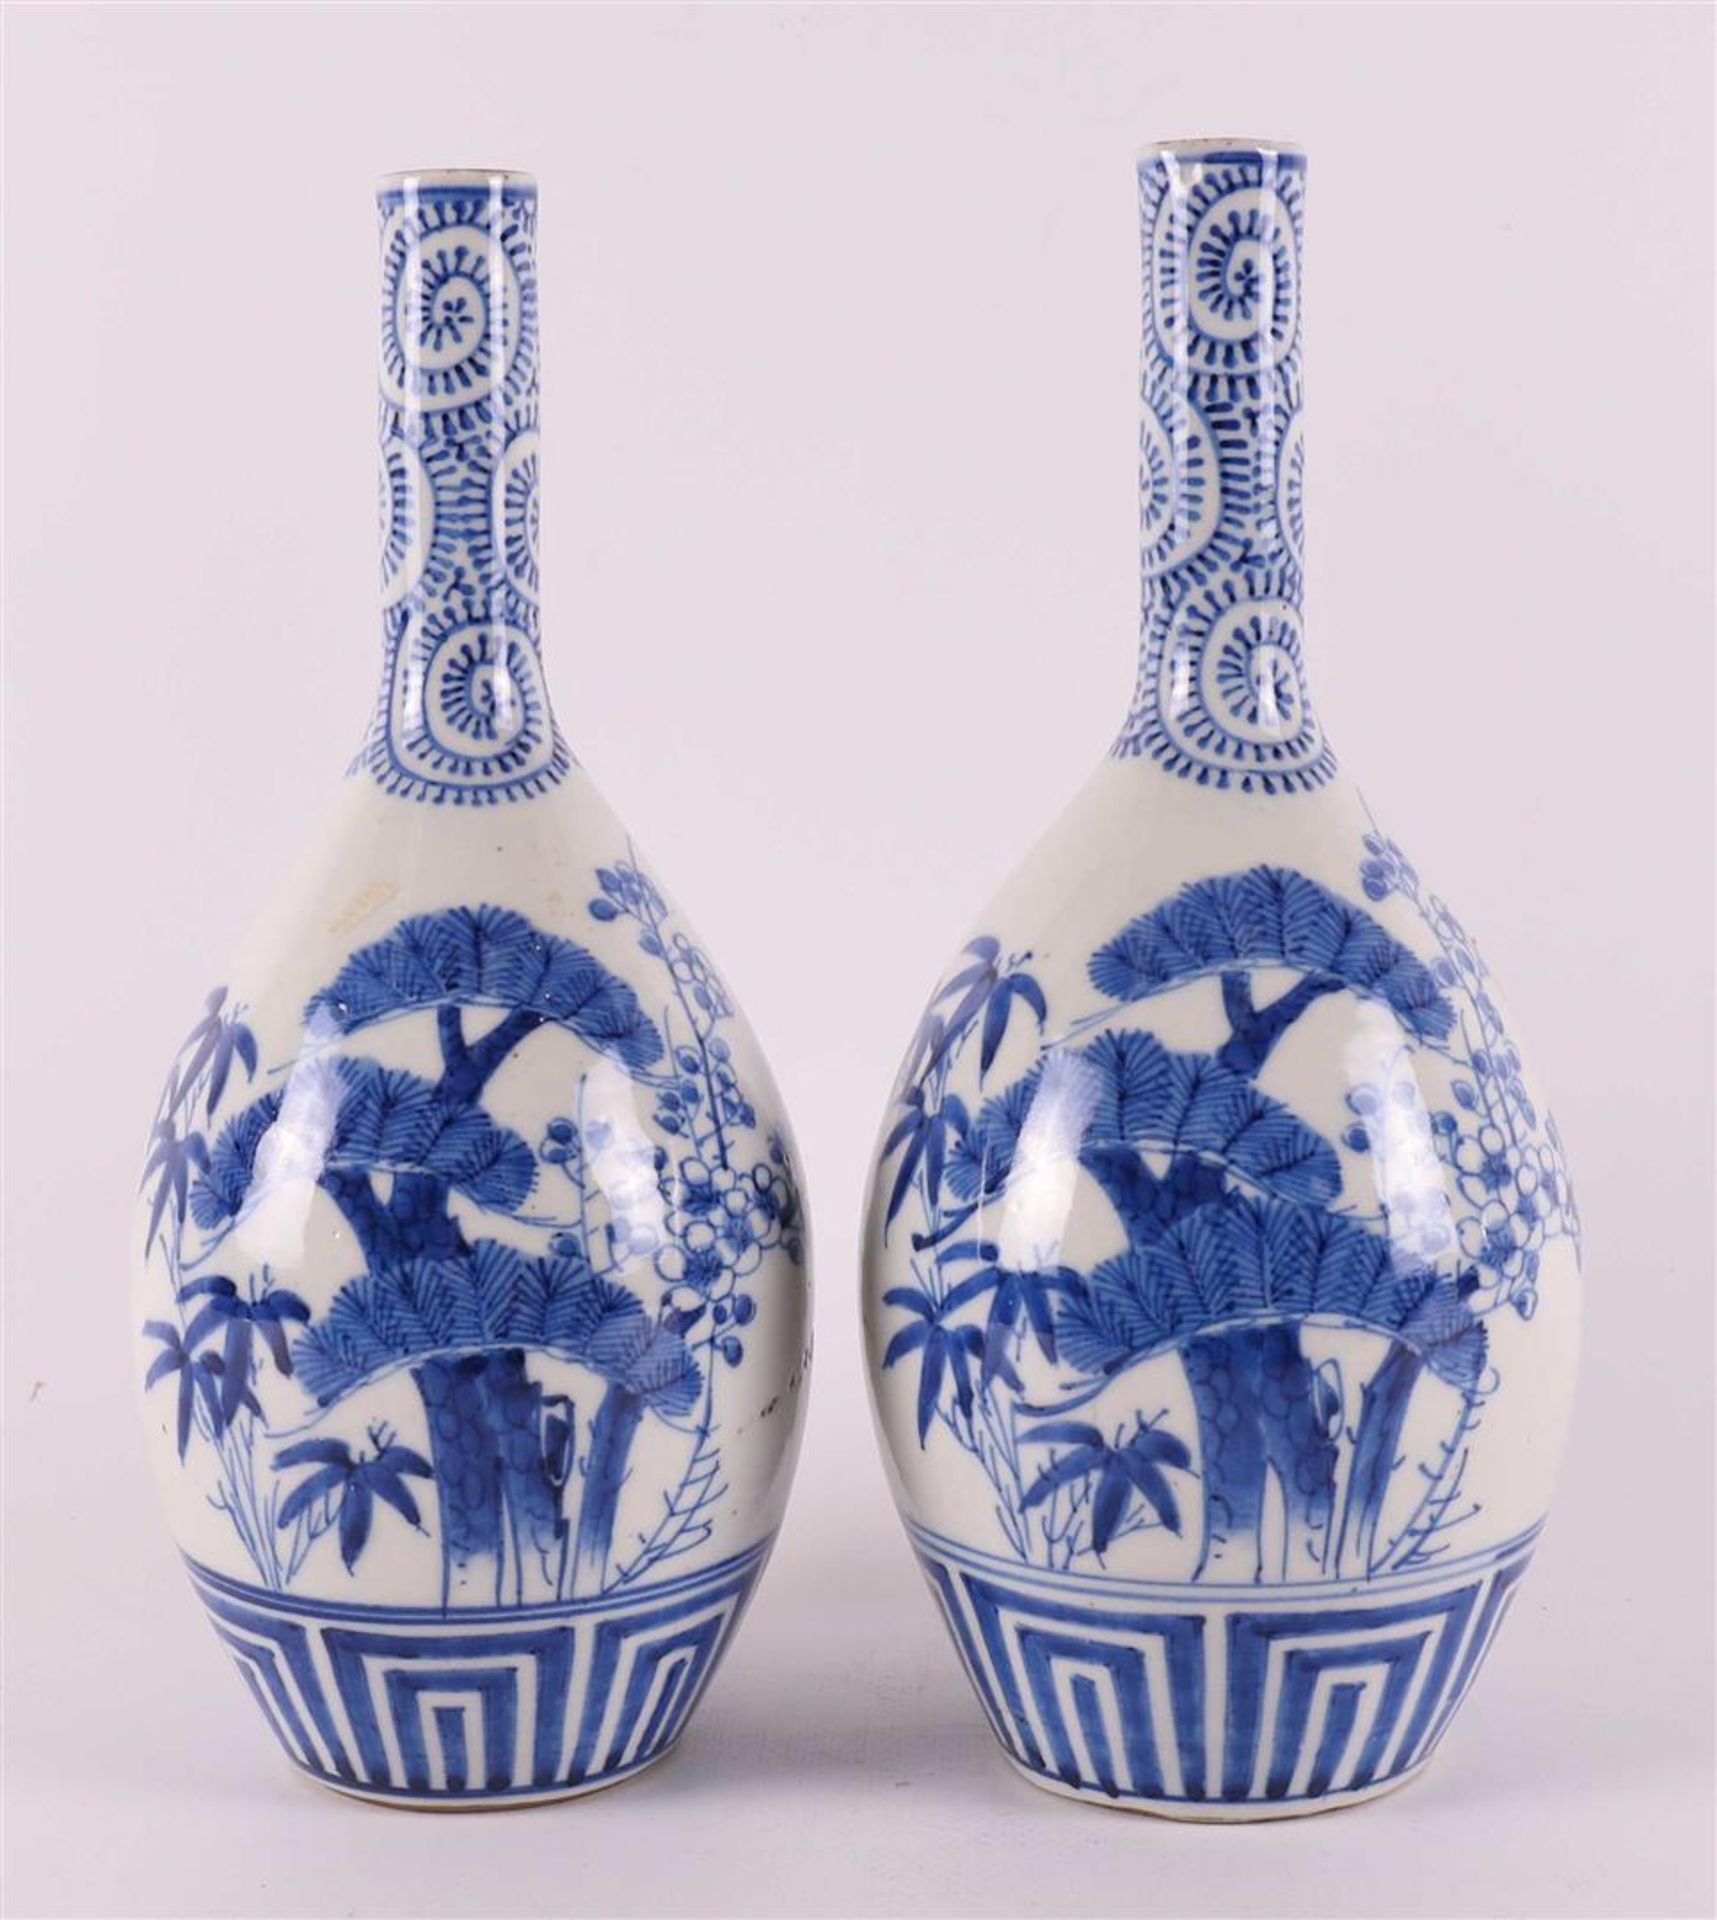 A pair of blue/white porcelain pointed vases, Japan, Meiji, around 1900.